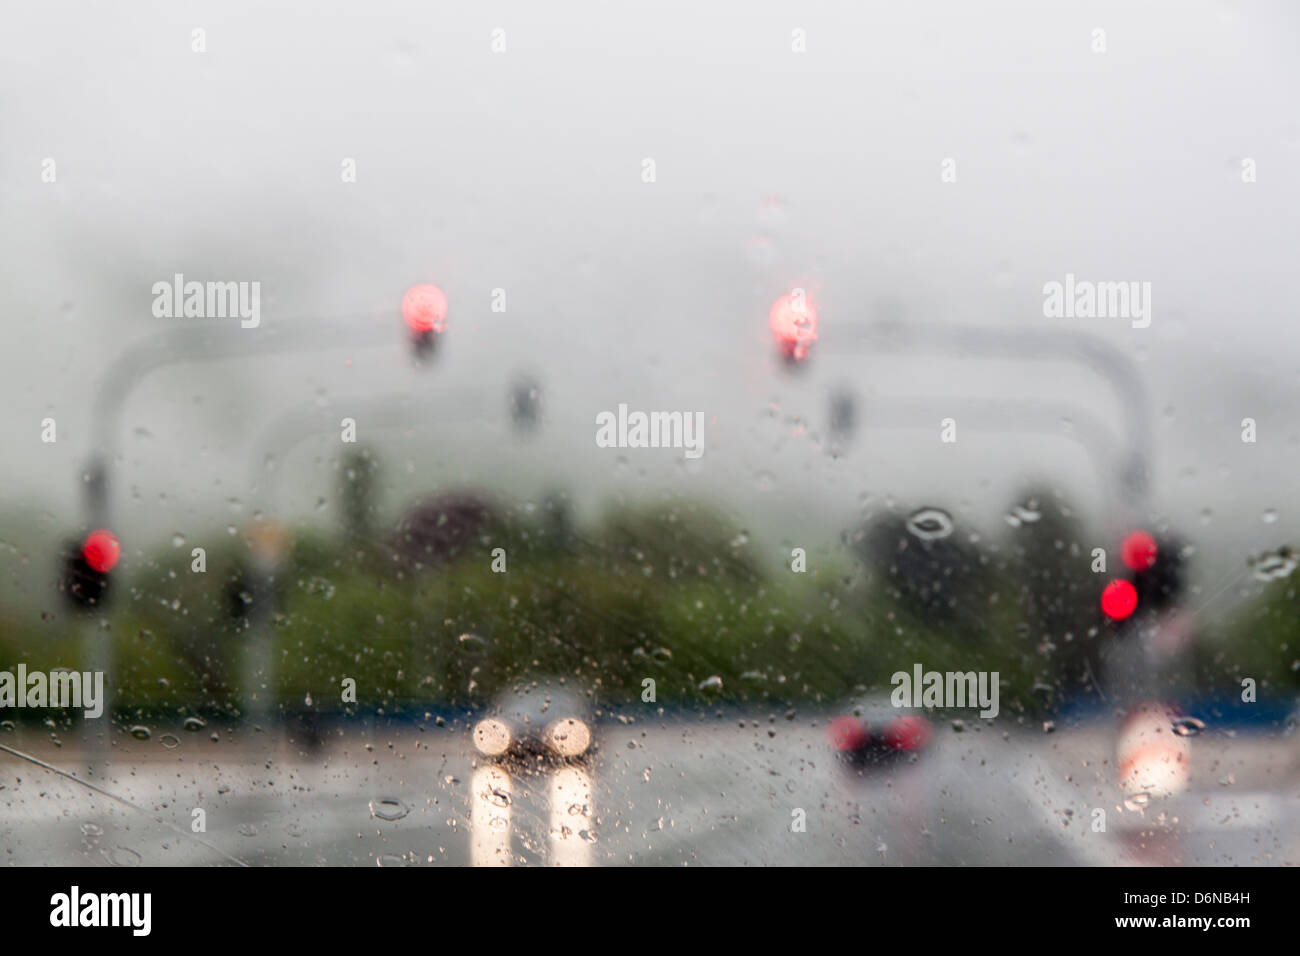 Bad Honnef, Germany, red light during rain Stock Photo